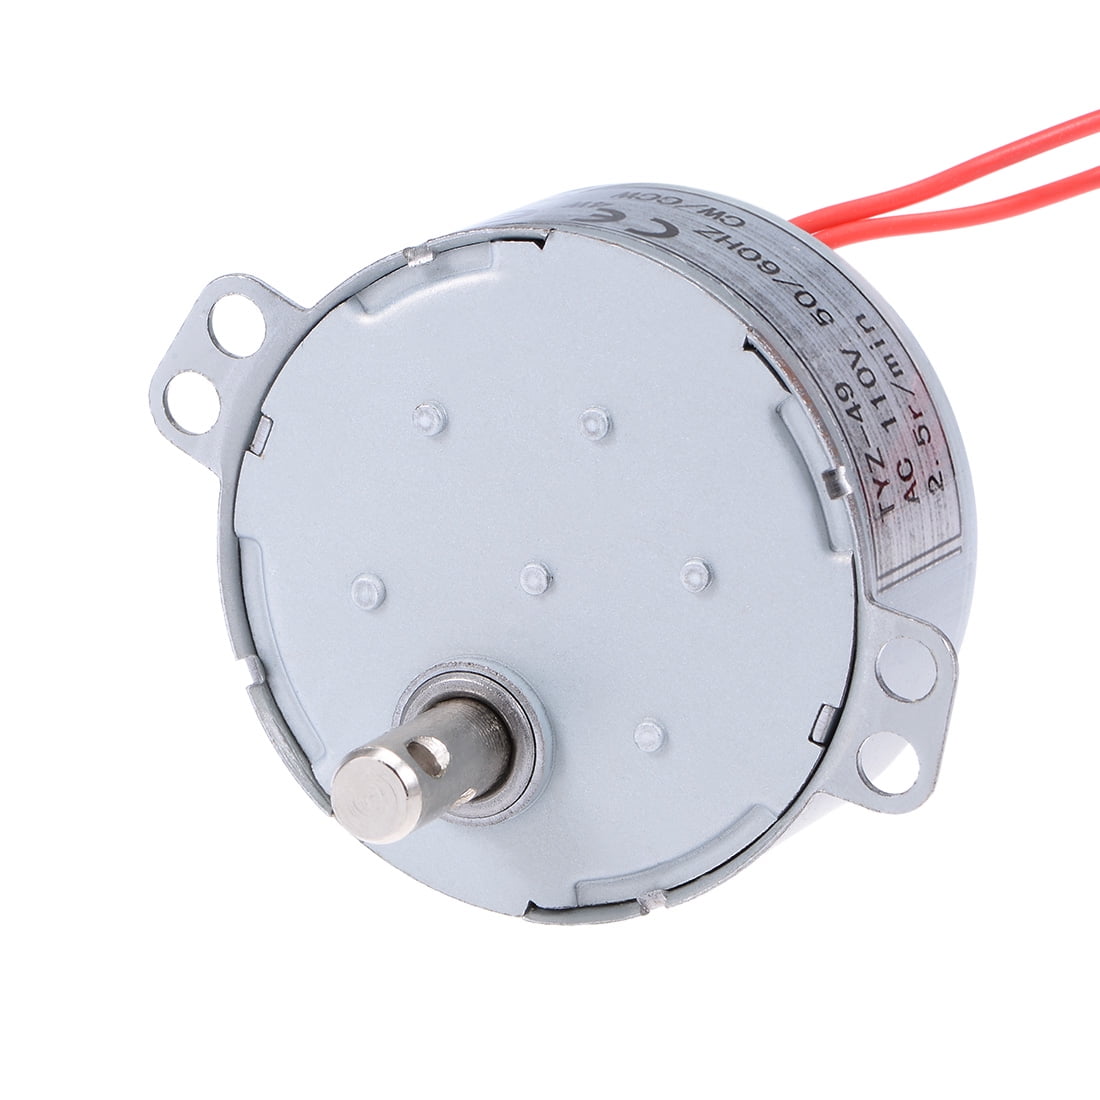 Details about   Electric Motor Synchronous Motor 50/60Hz AC 110-127V 4W CCW/CW AC Motor 2.5-3RPM